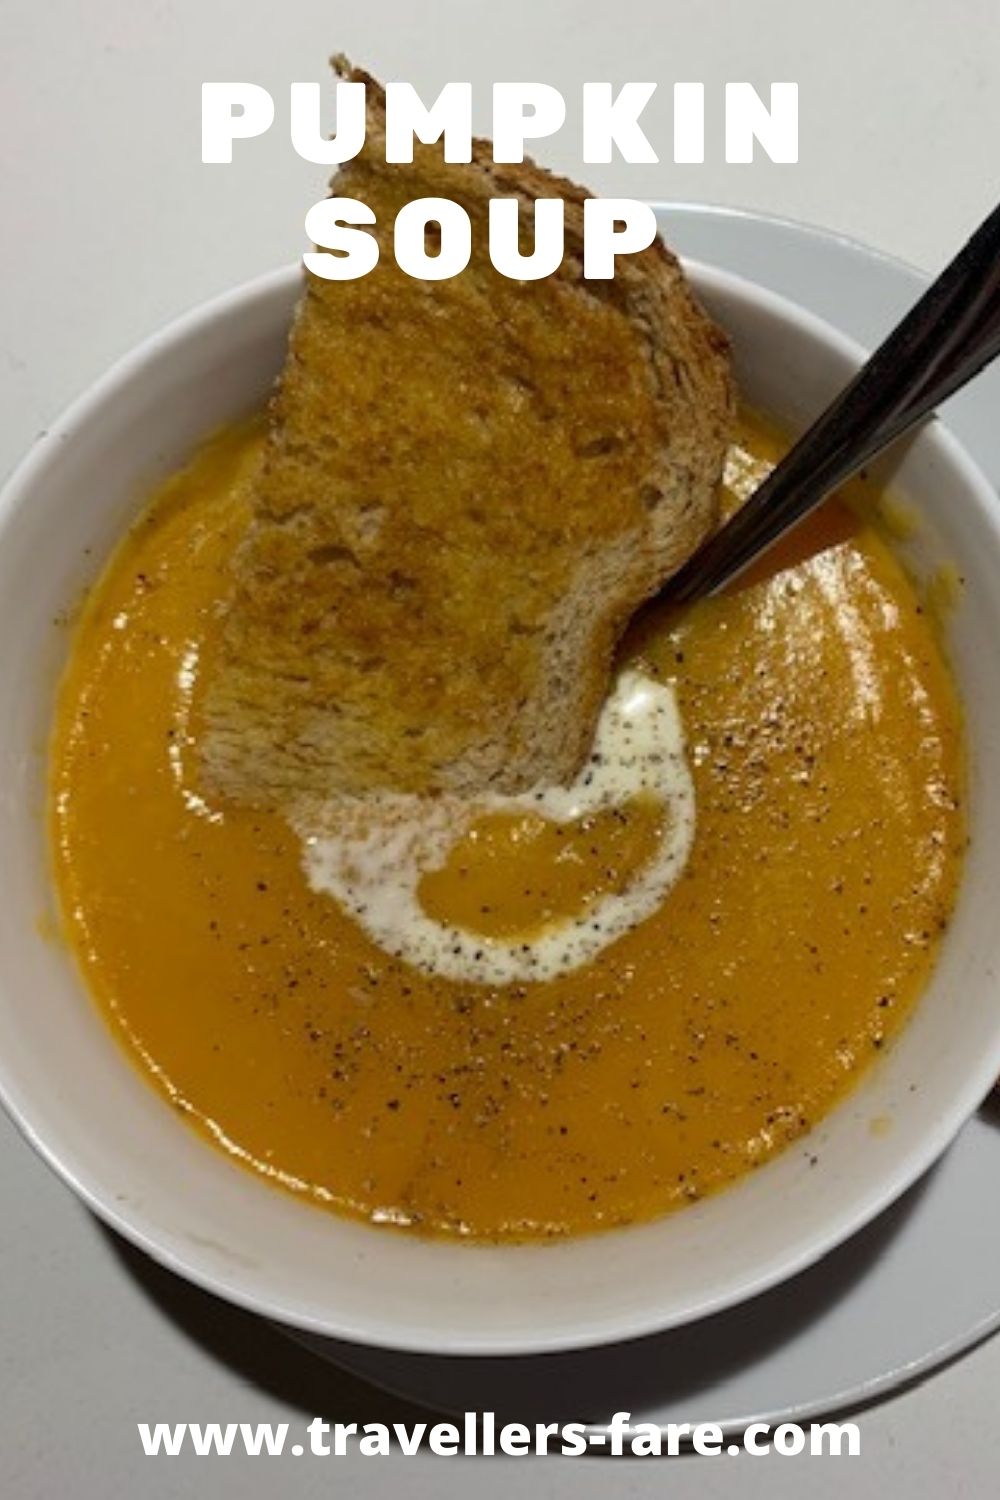 Pumpkin Soup In A White Bowl With A Dollop Of Cream And Black Pepper On Top. Served With Buttered Toast.